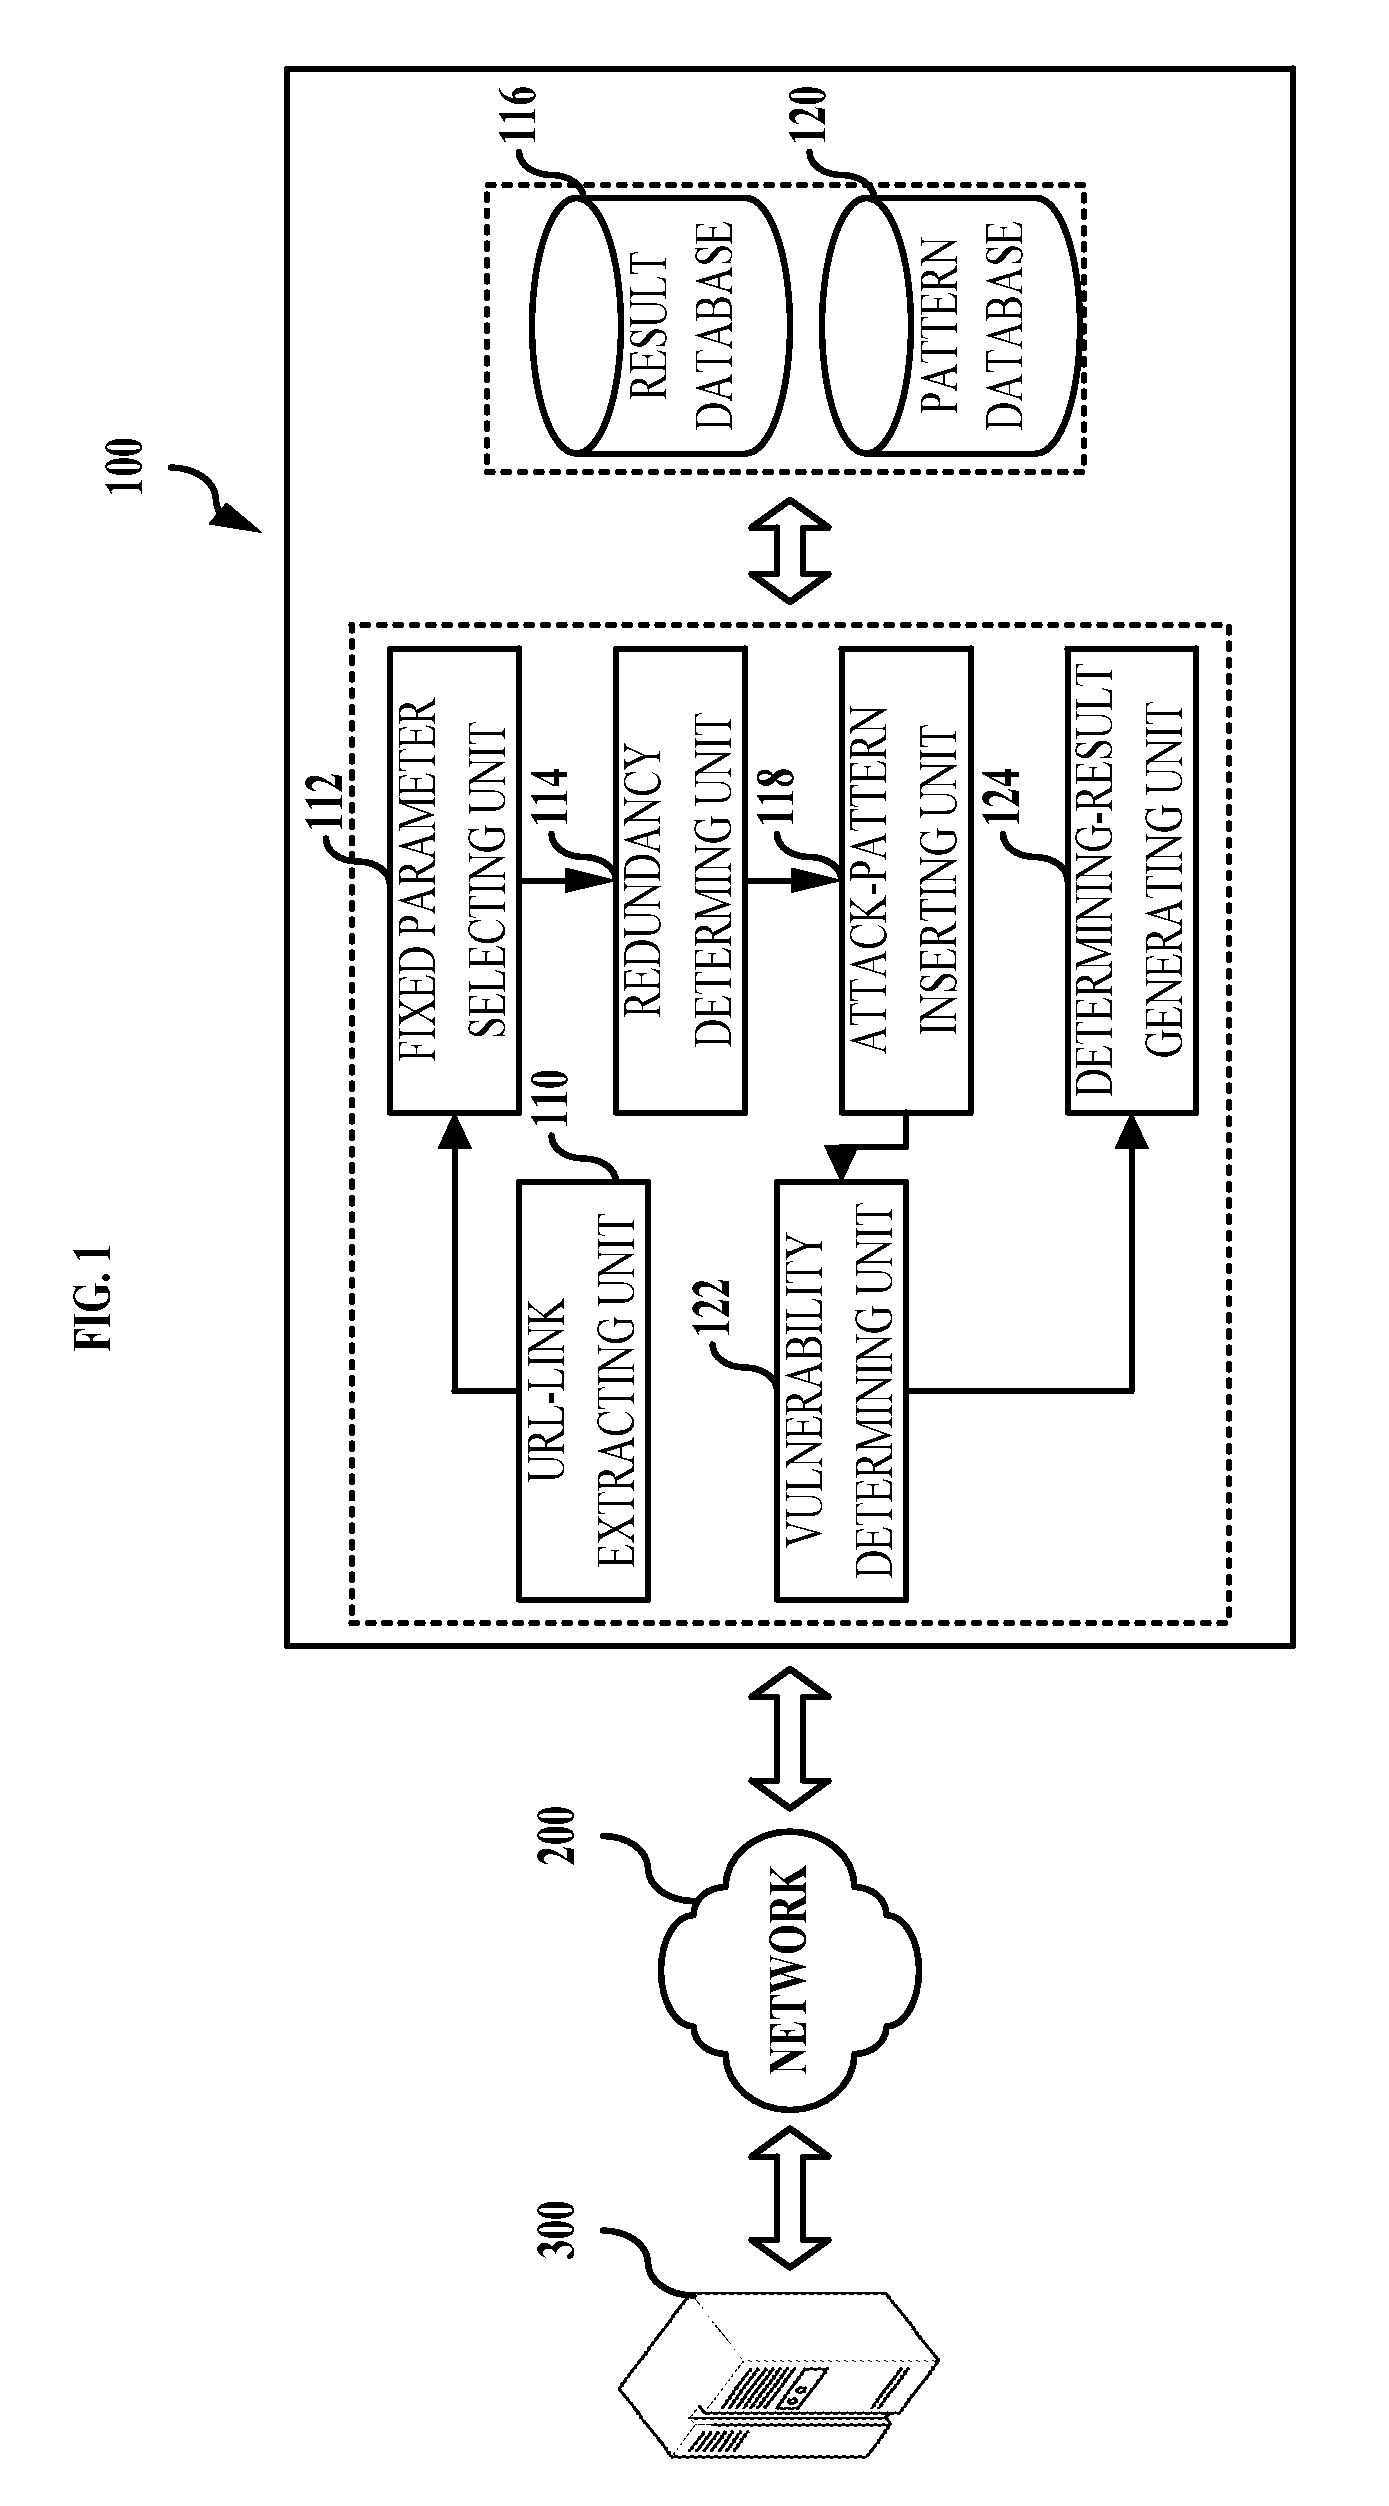 Method and system of determining vulnerability of web application